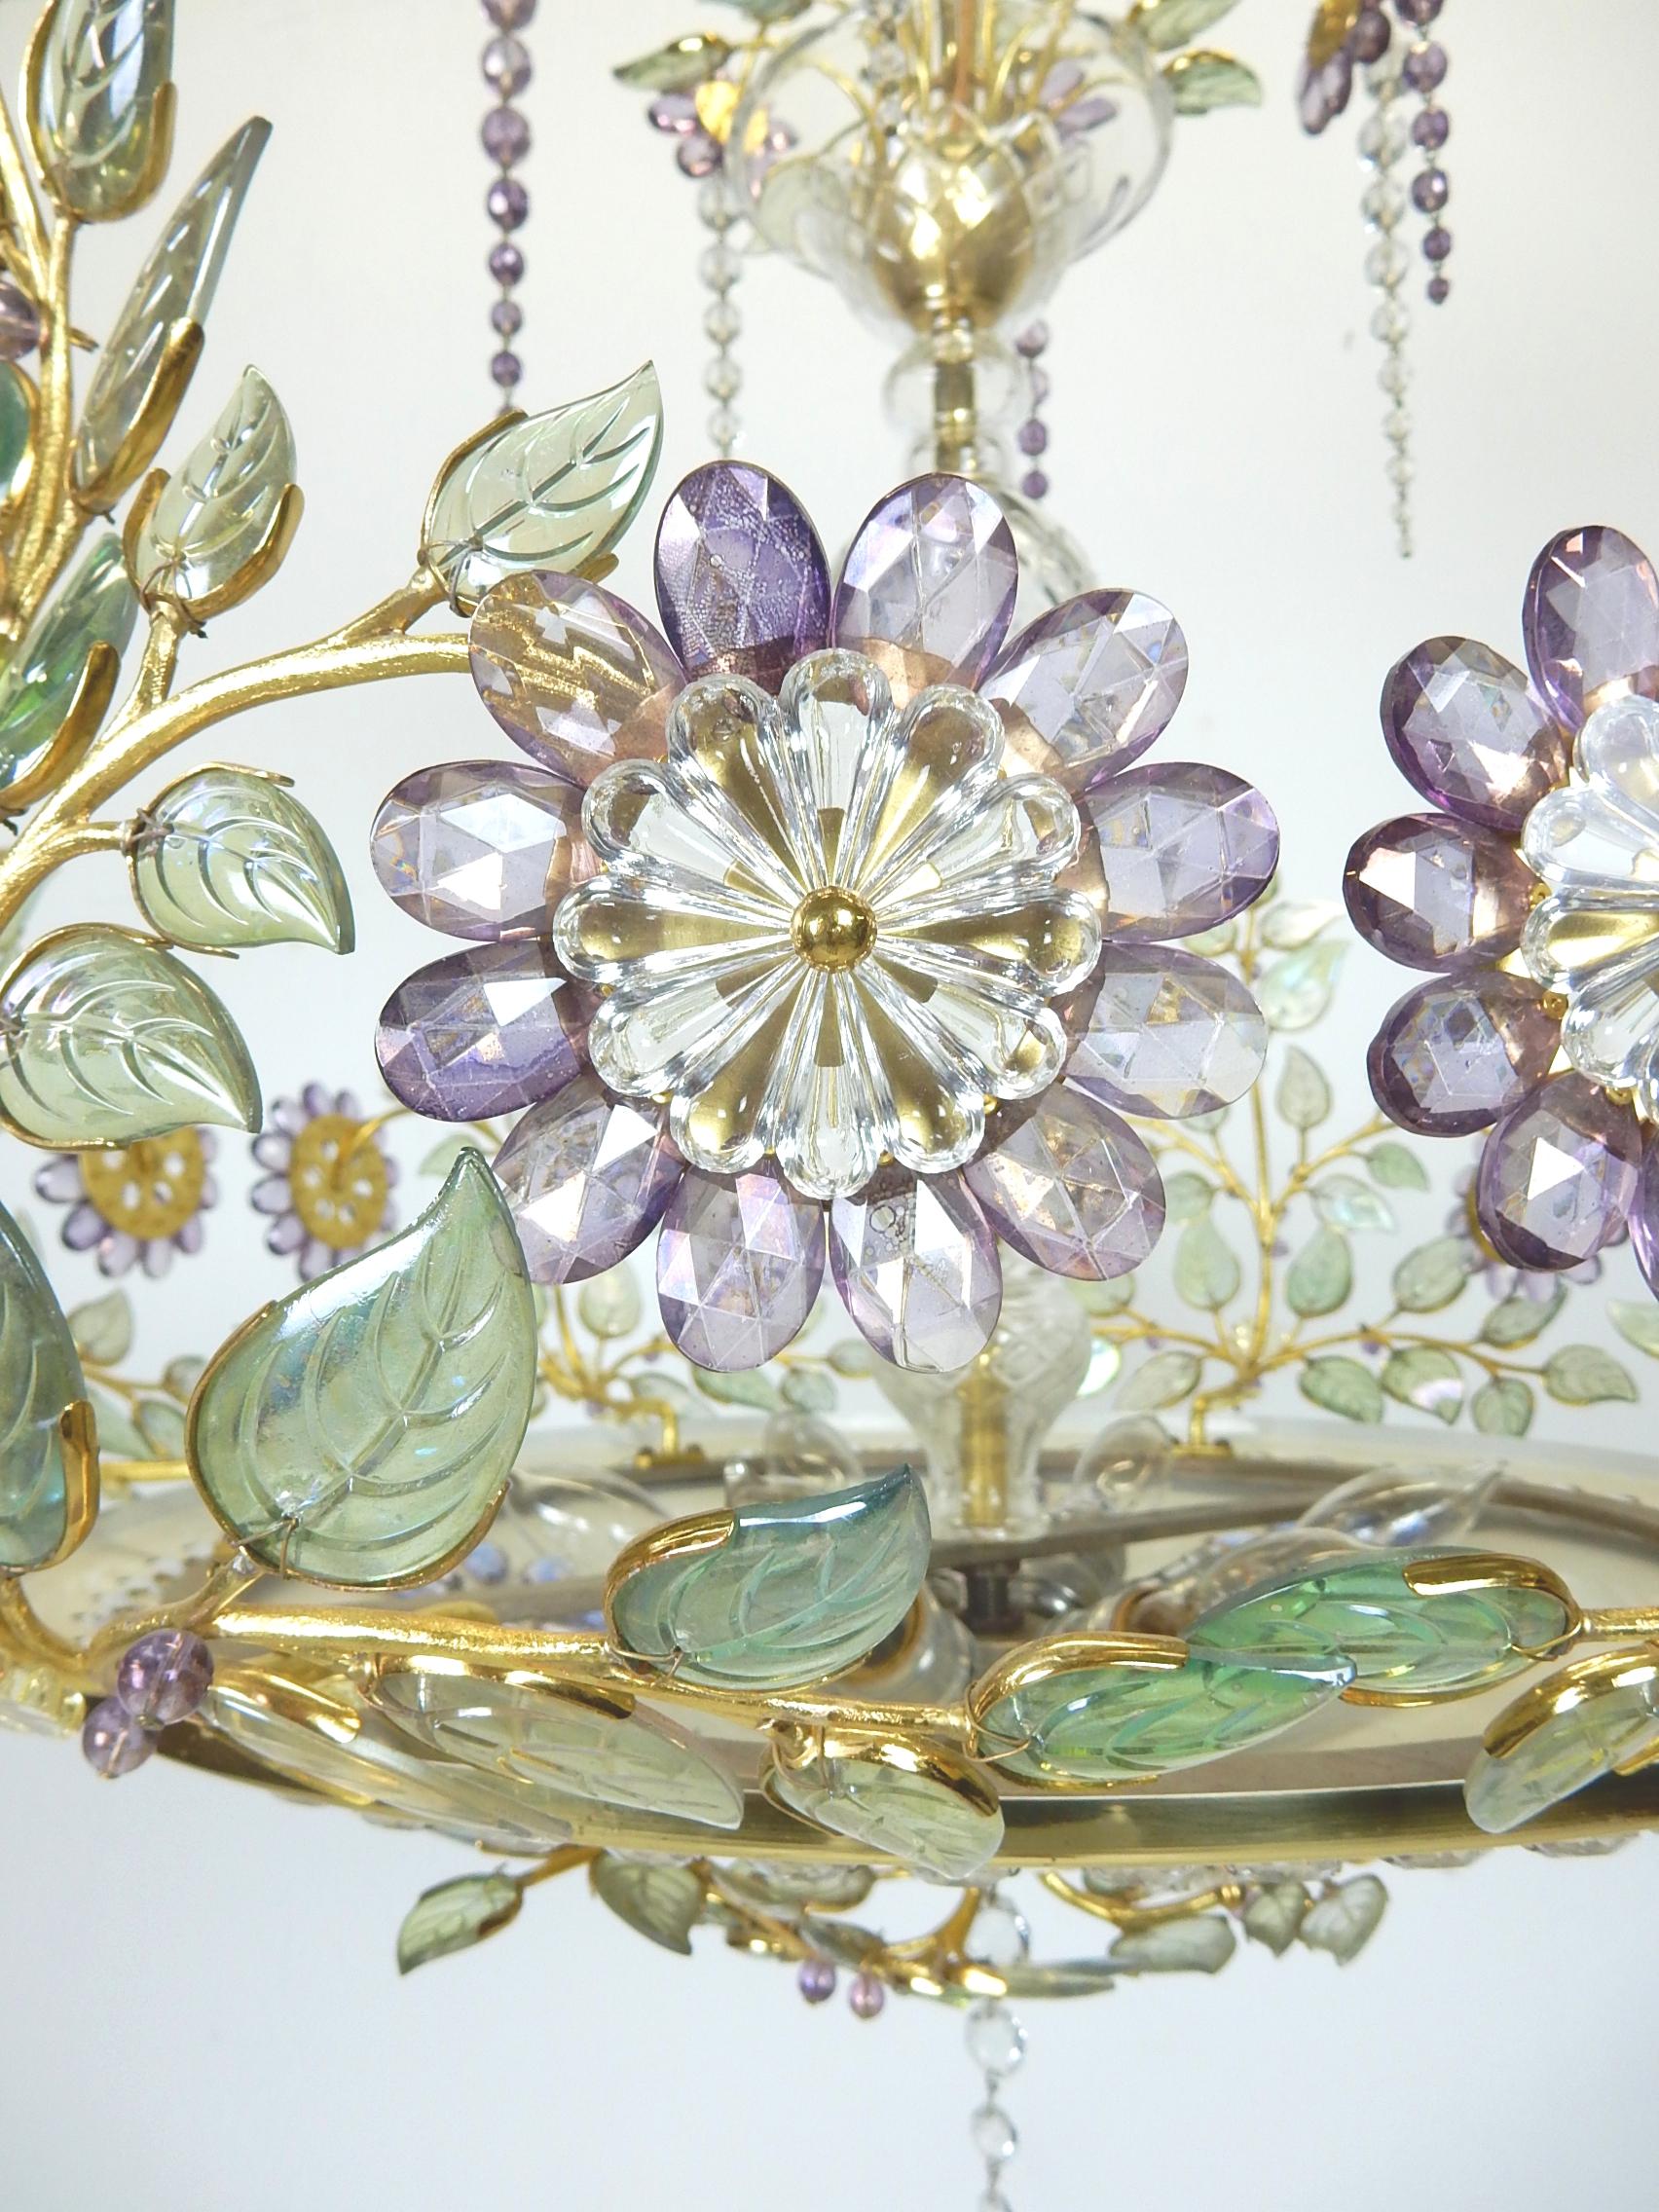 Incredibly beautiful floral crystal and brass chandelier by French lighting design firm Maison Baguès, circa 1950s.
Gorgeous violet, pale green and clear glass on gilded gold stems with a brass shade and ceiling cap.
Requires six standard light